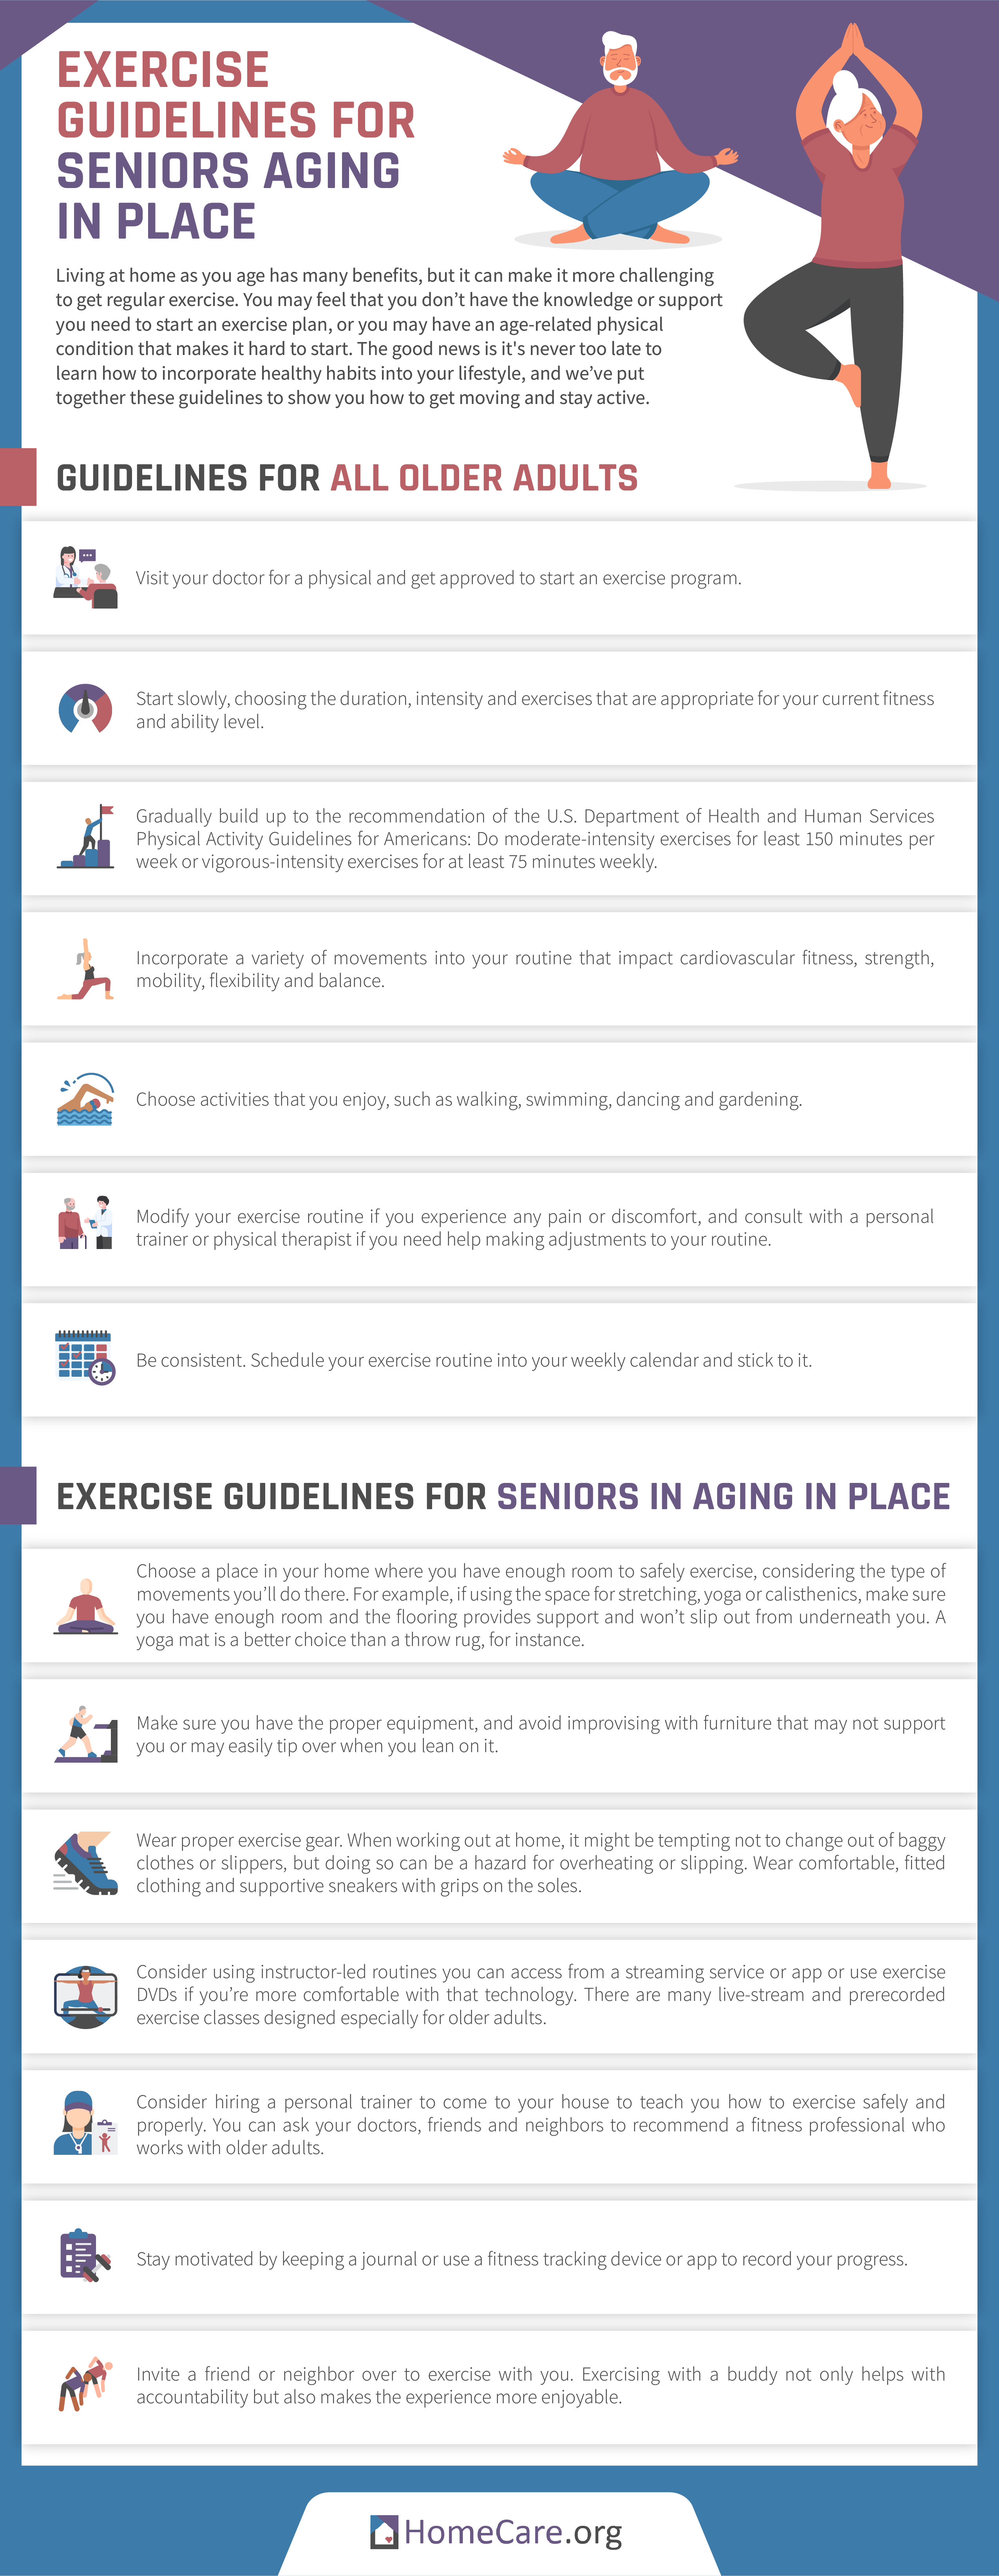 How to Start Exercising Again After the Holiday Season -, Senior Home Care  Helping Seniors Live Well at Home